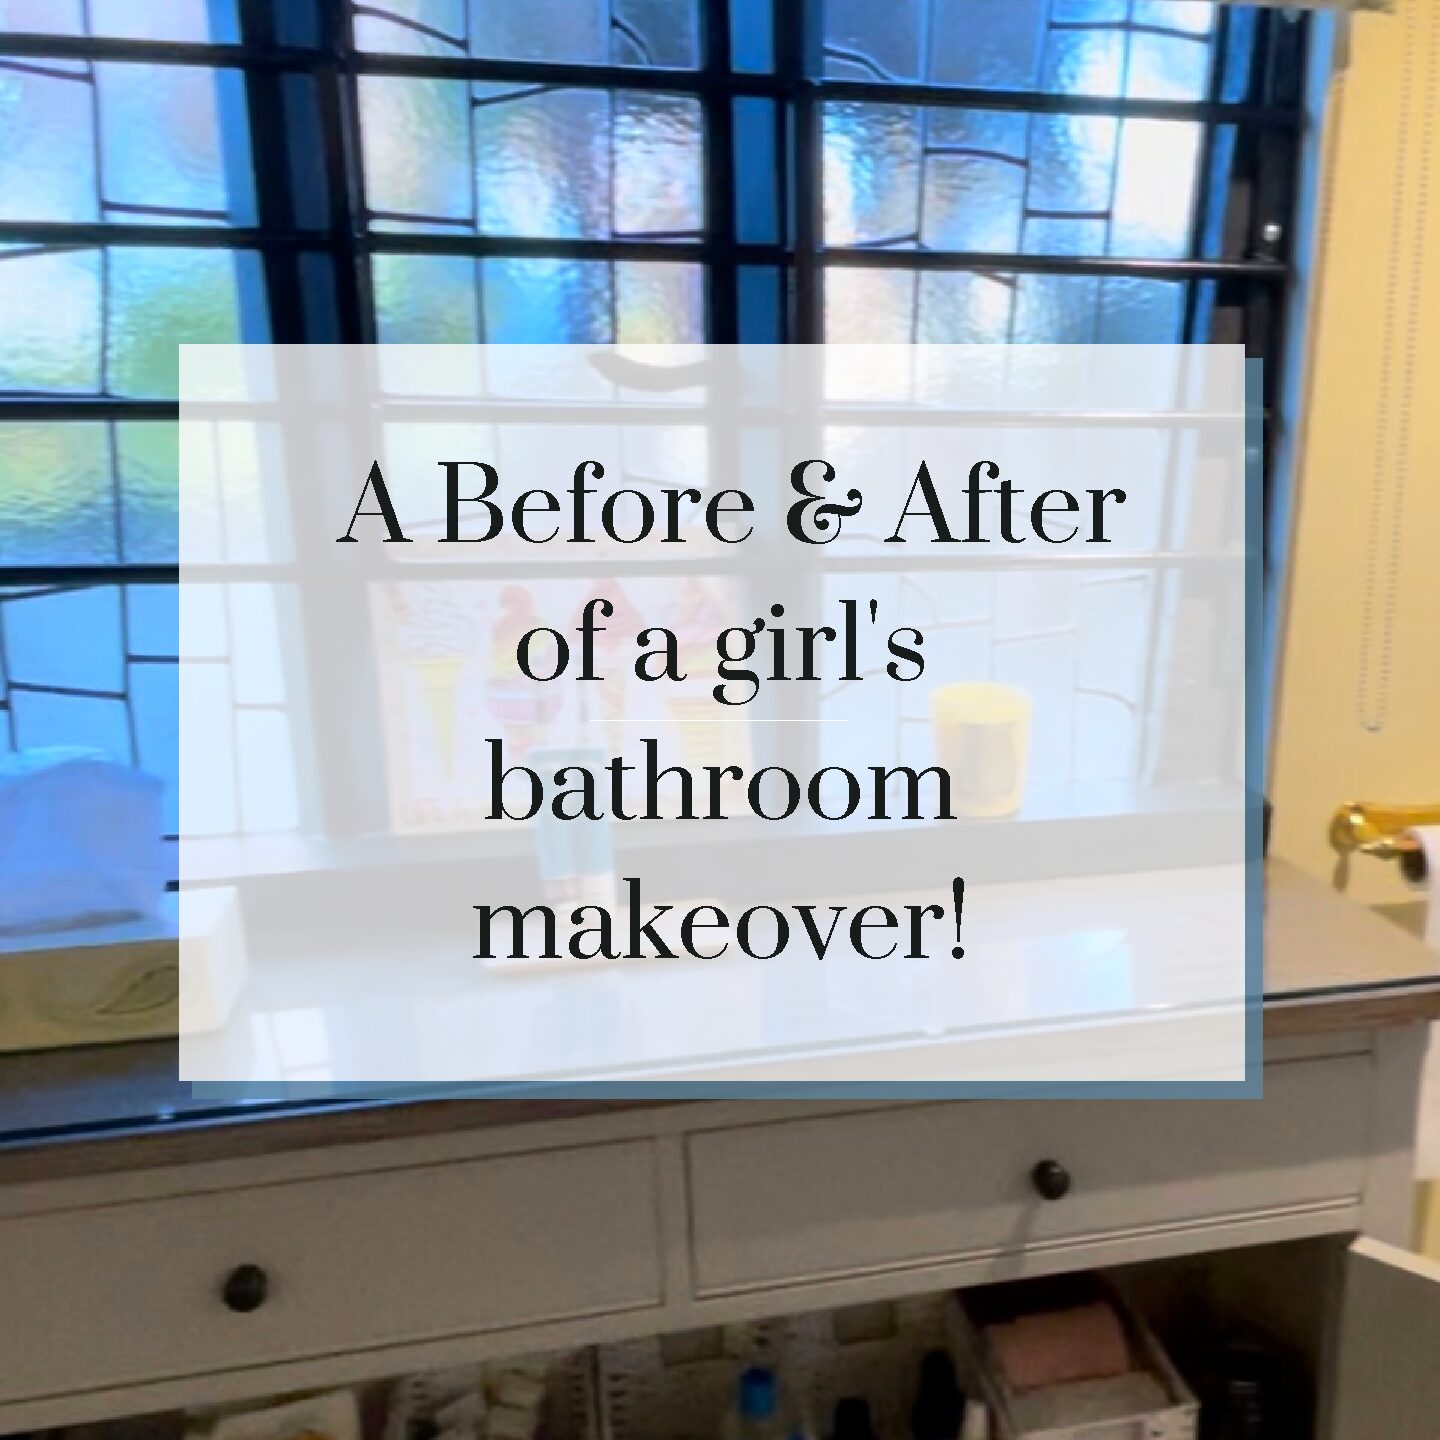 A Before & After of a girl’s bathroom makeover!